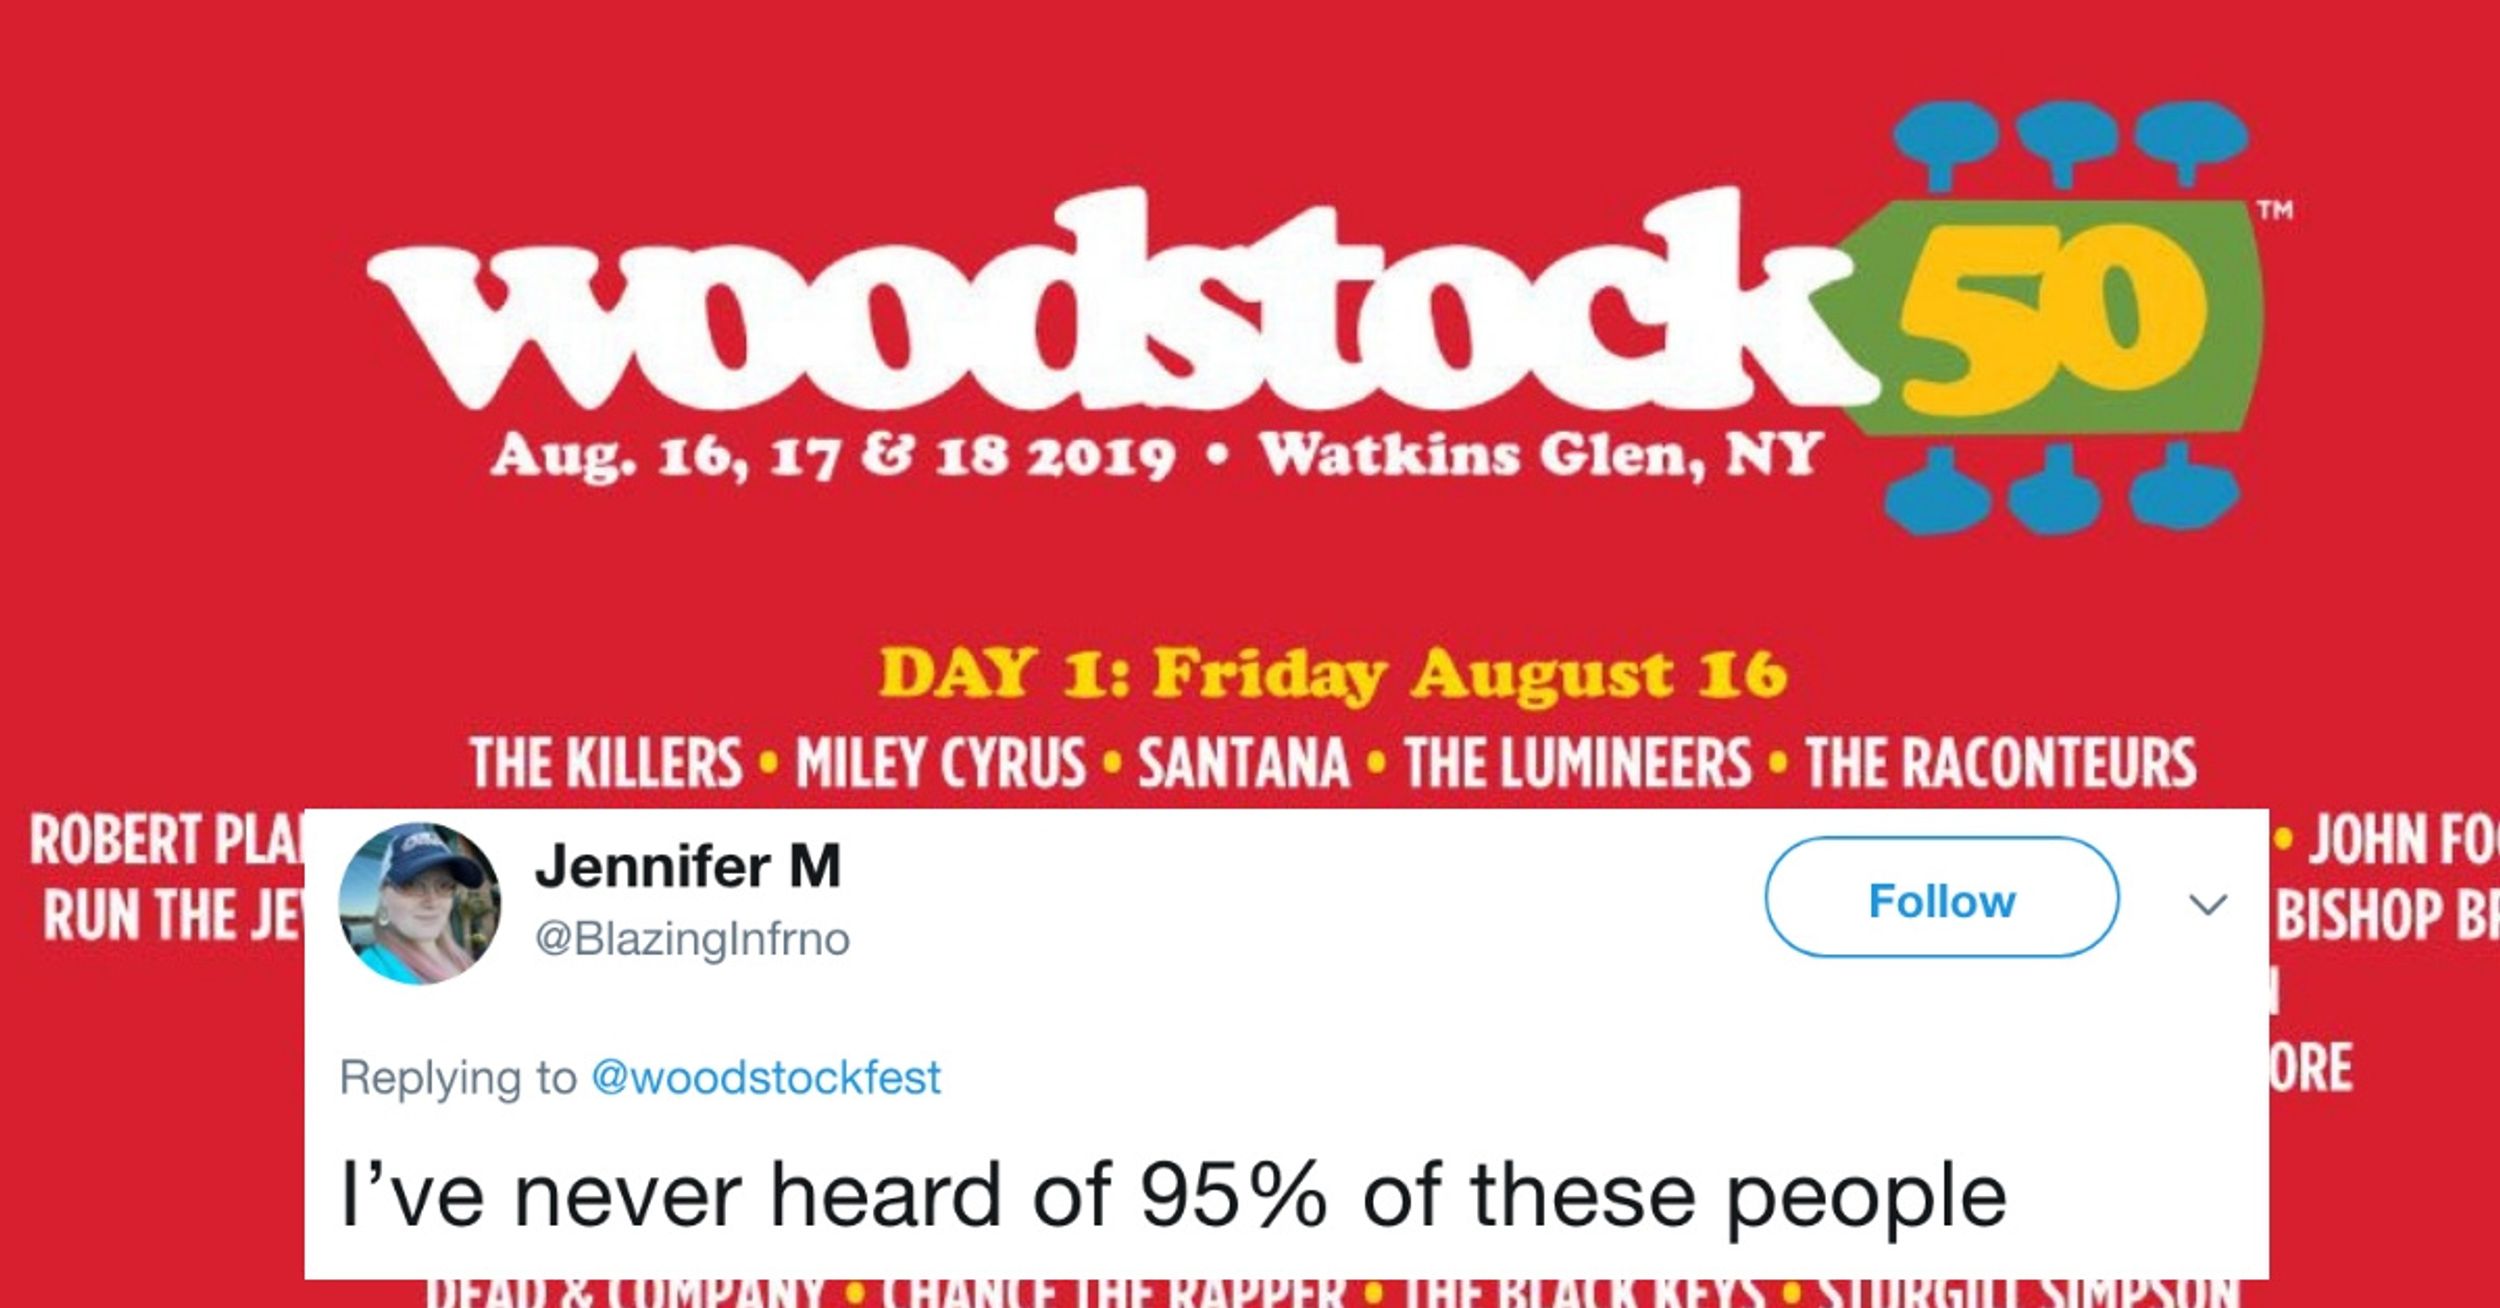 The Lineup For The 50th Anniversary Of Woodstock Is Drawing Some Decidedly Mixed Reactions